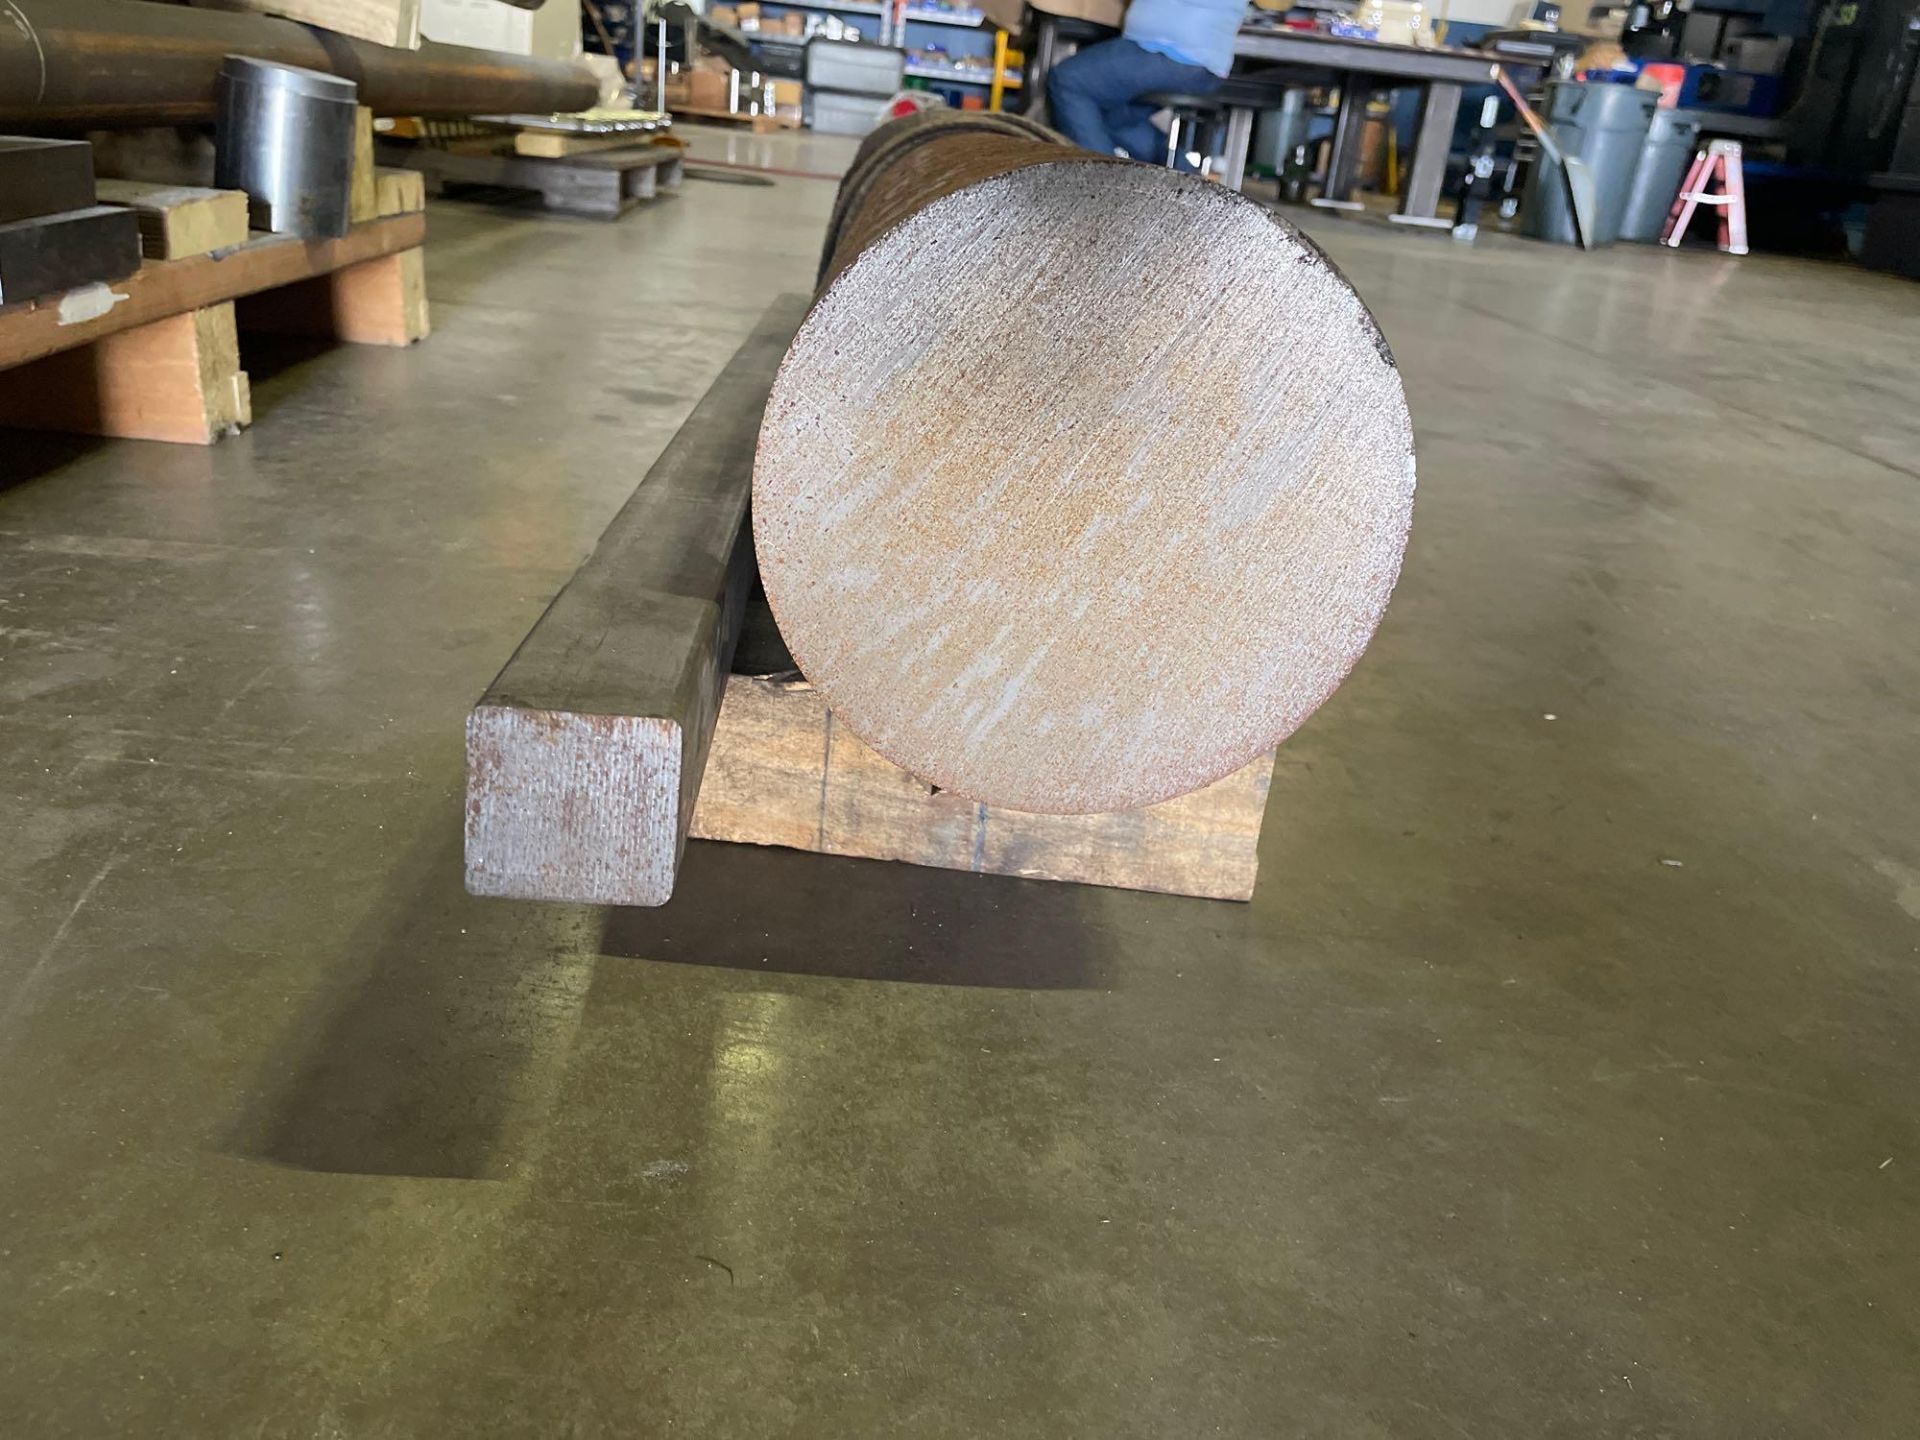 Lot of 2: (1) Solid Square Bar, 64” X 2” x 2”, (1) Round Bar, 66” X 8” Dia. - Image 2 of 5